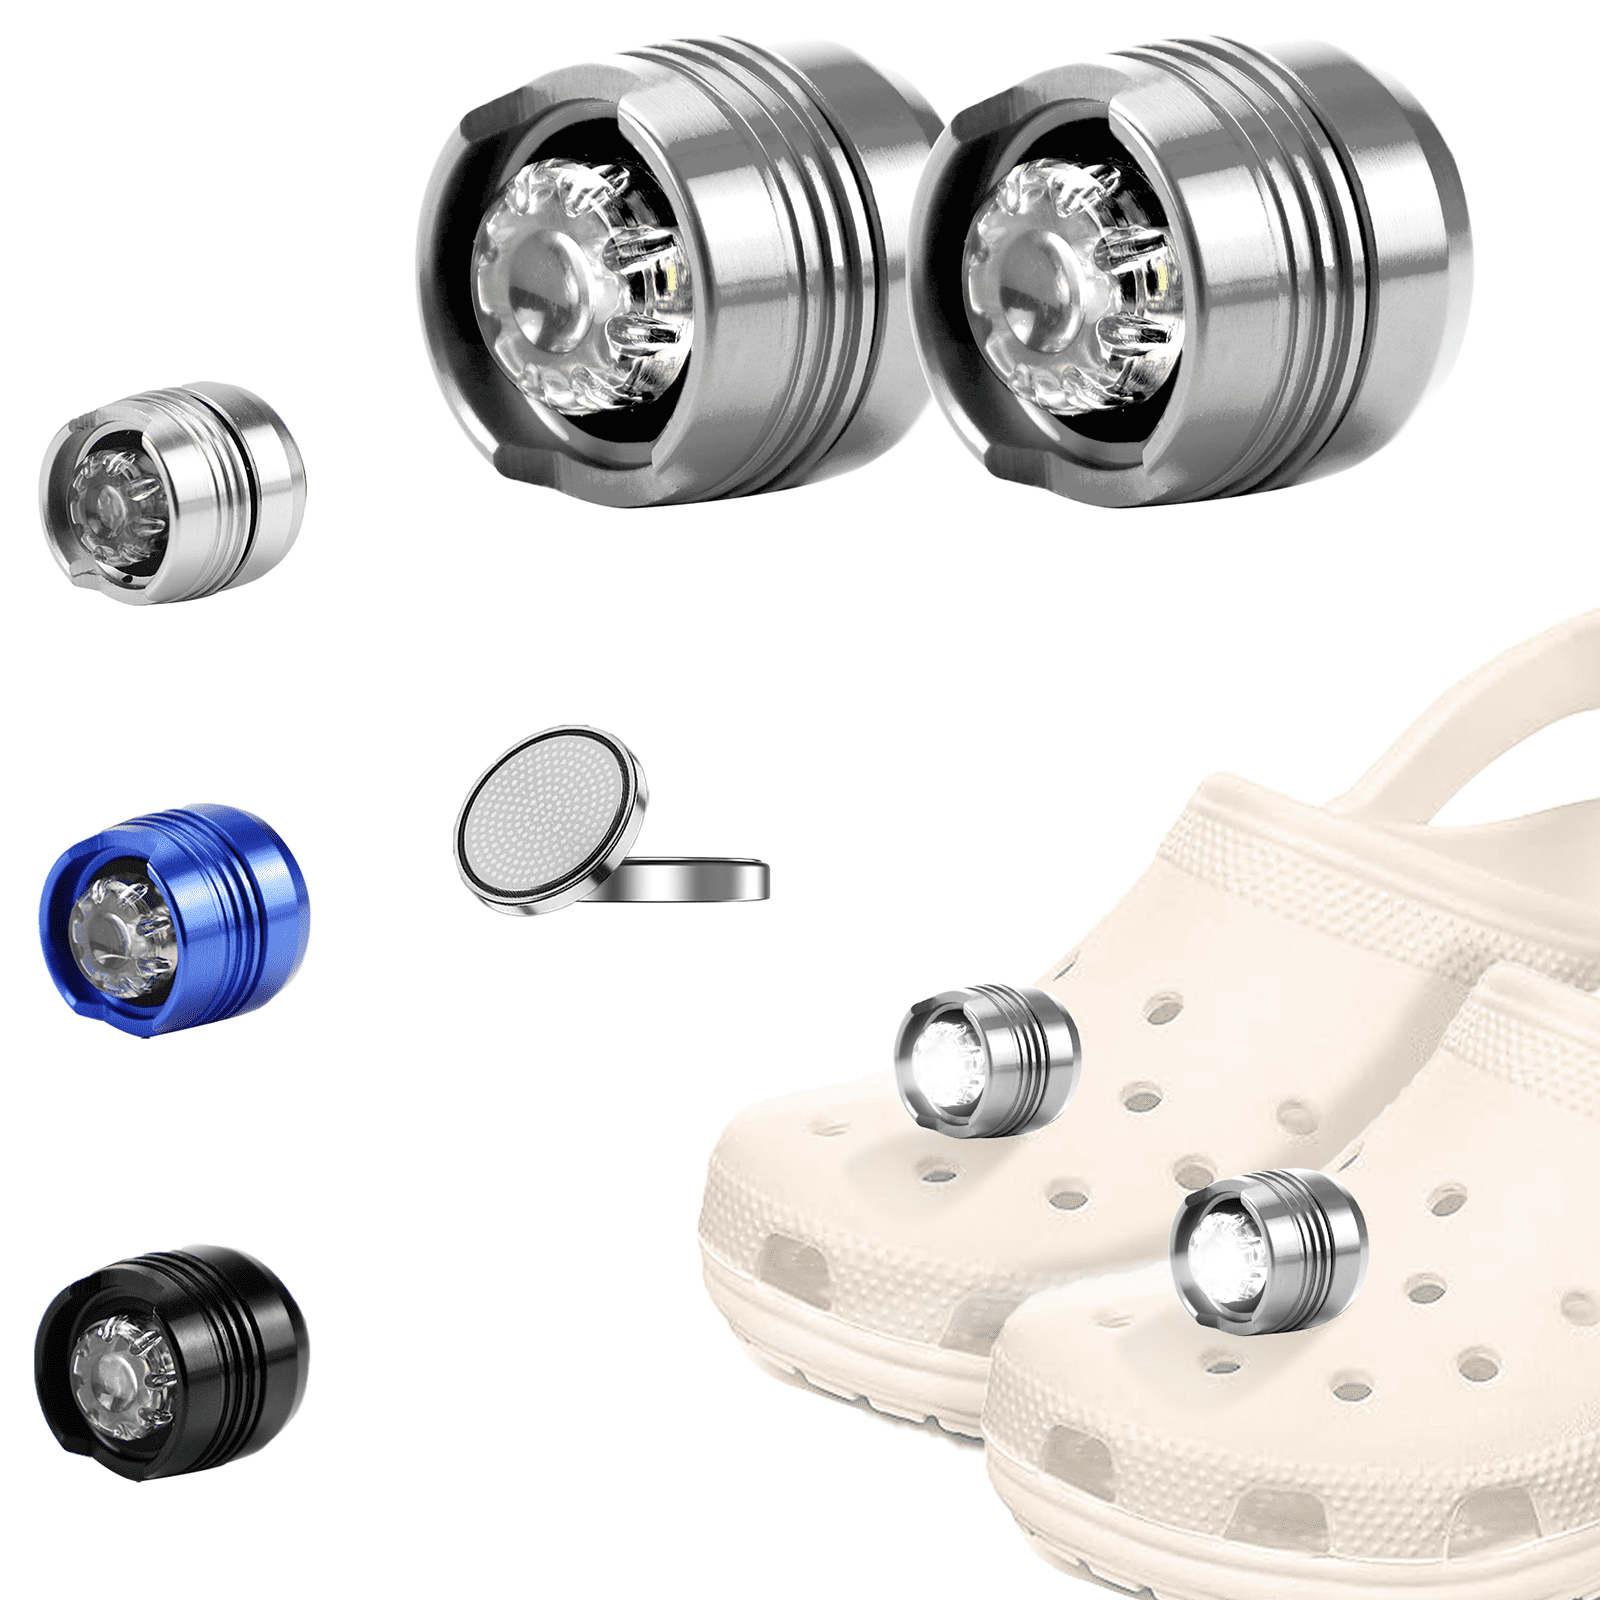 2pc LED Headlight for Crocs Clogs, Upgraded Version with Clip on Steady ...